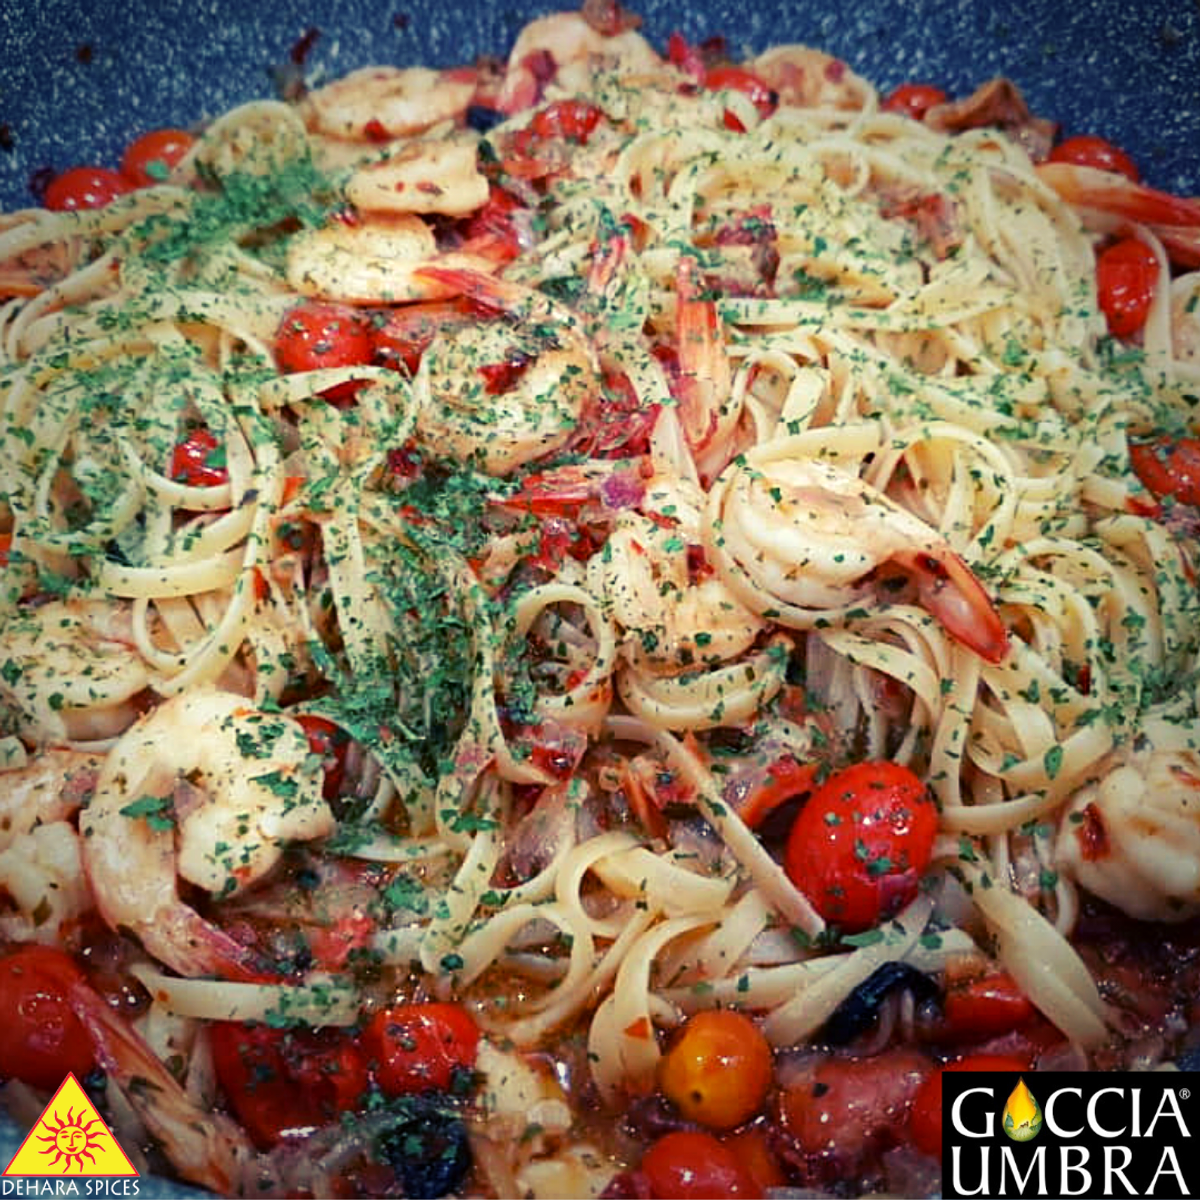 Puttanesca with prawns and cherry tomatoes roasted in balsamic vinegar (serves 4)